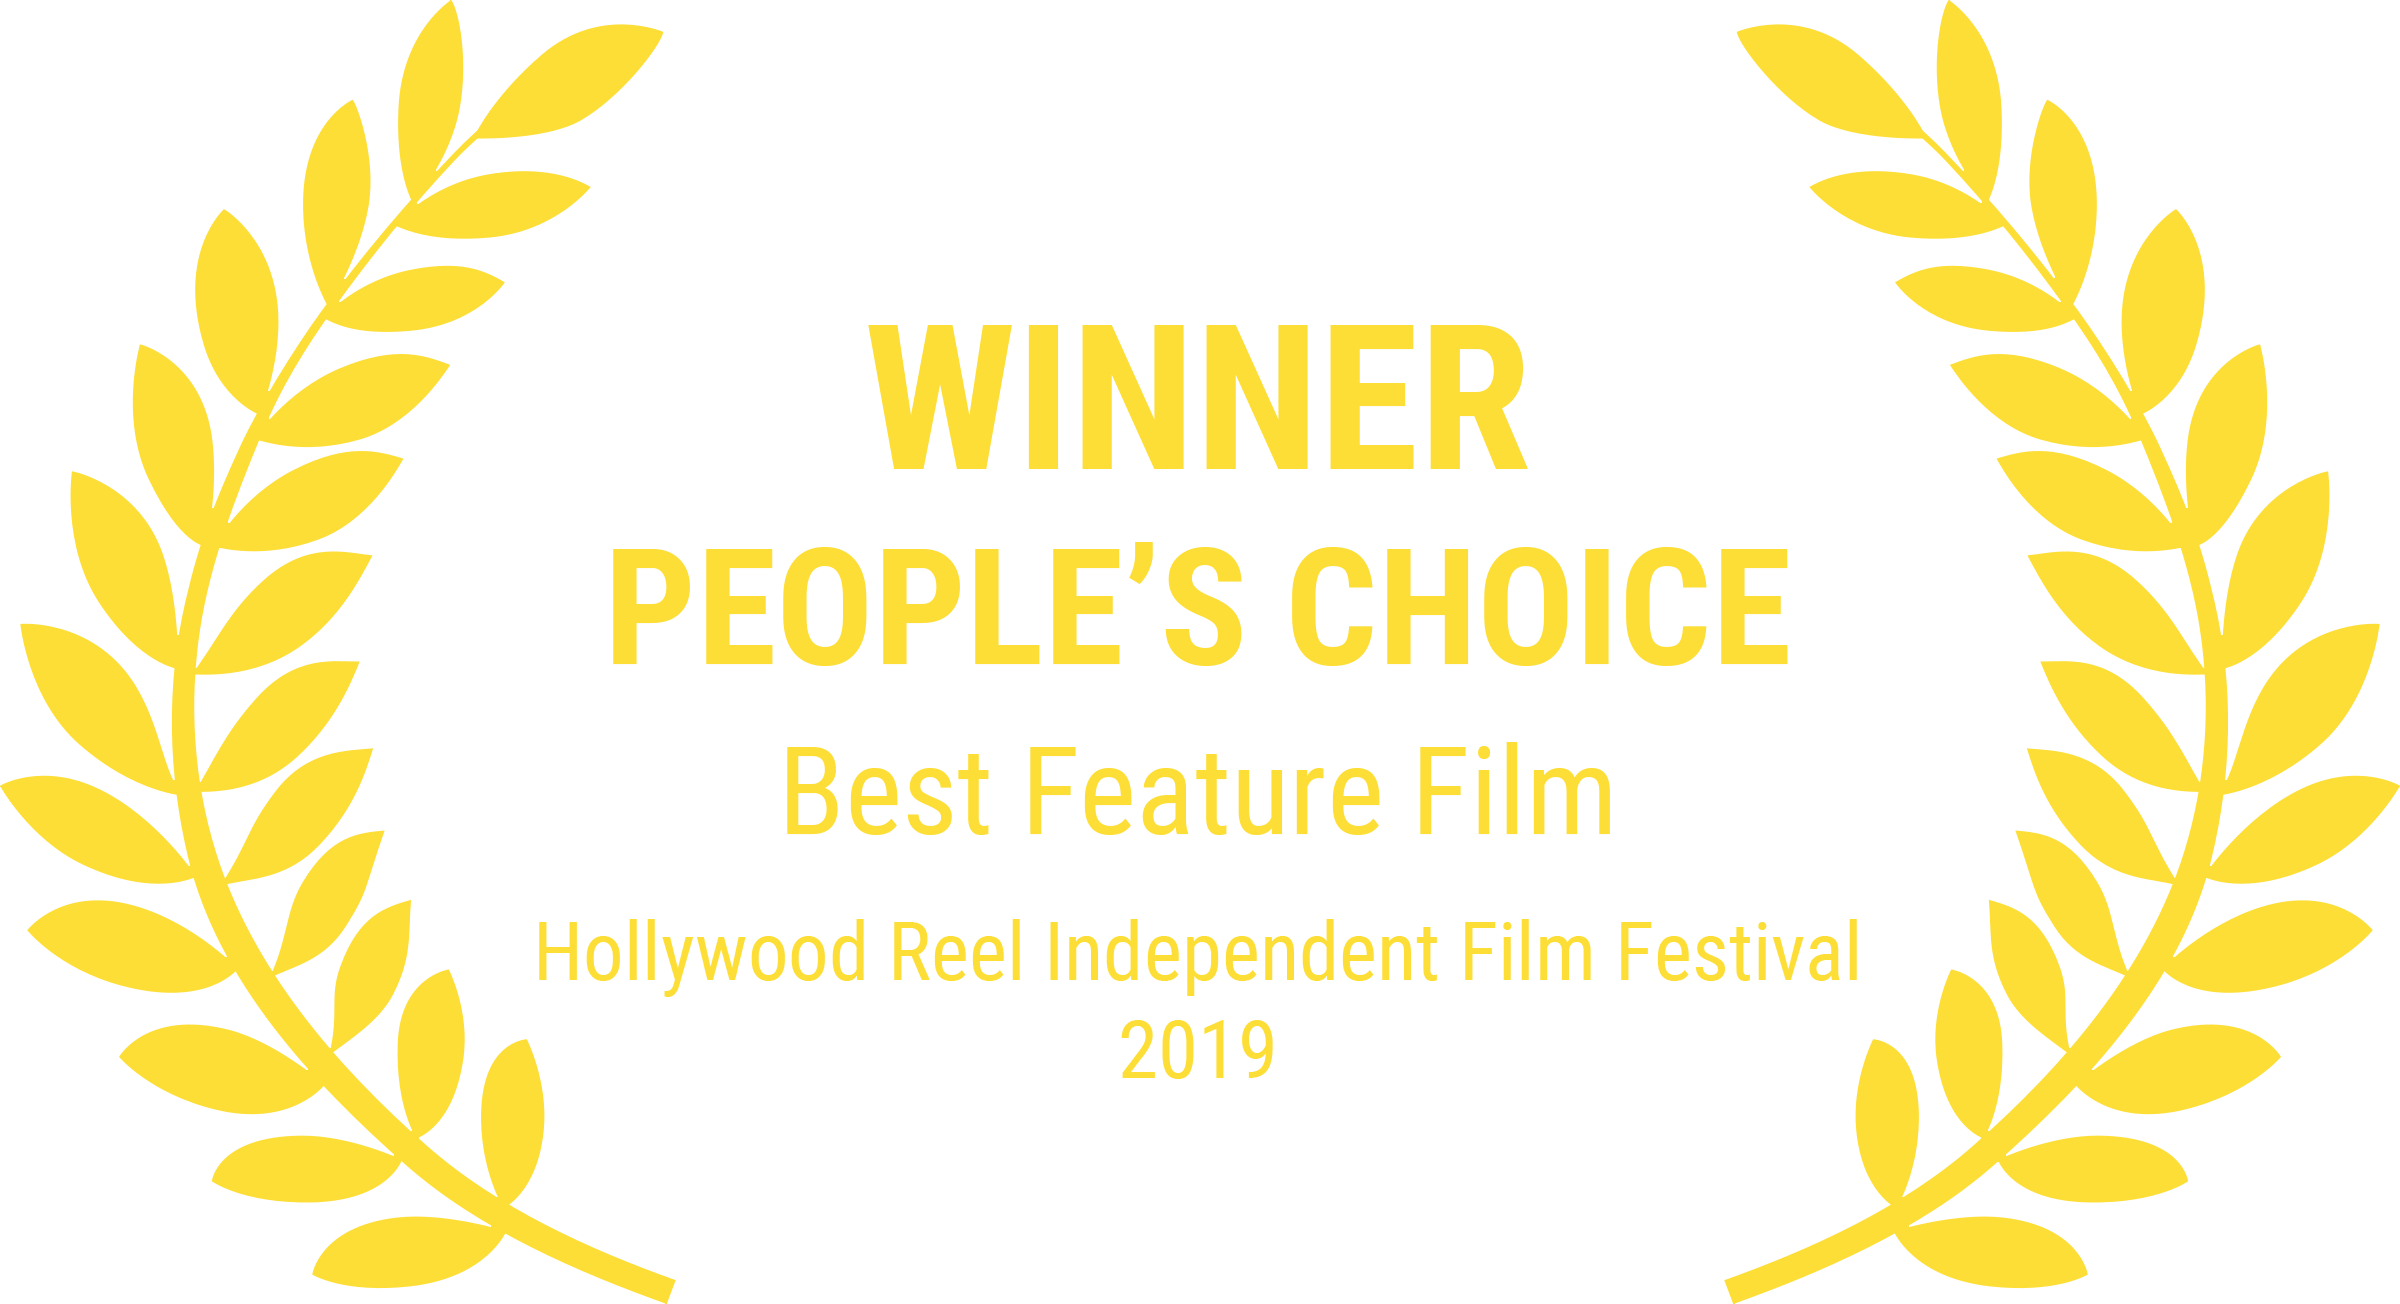 Low Low - People's Choice Award - Hollywood Reel Independent Film Festival 2019